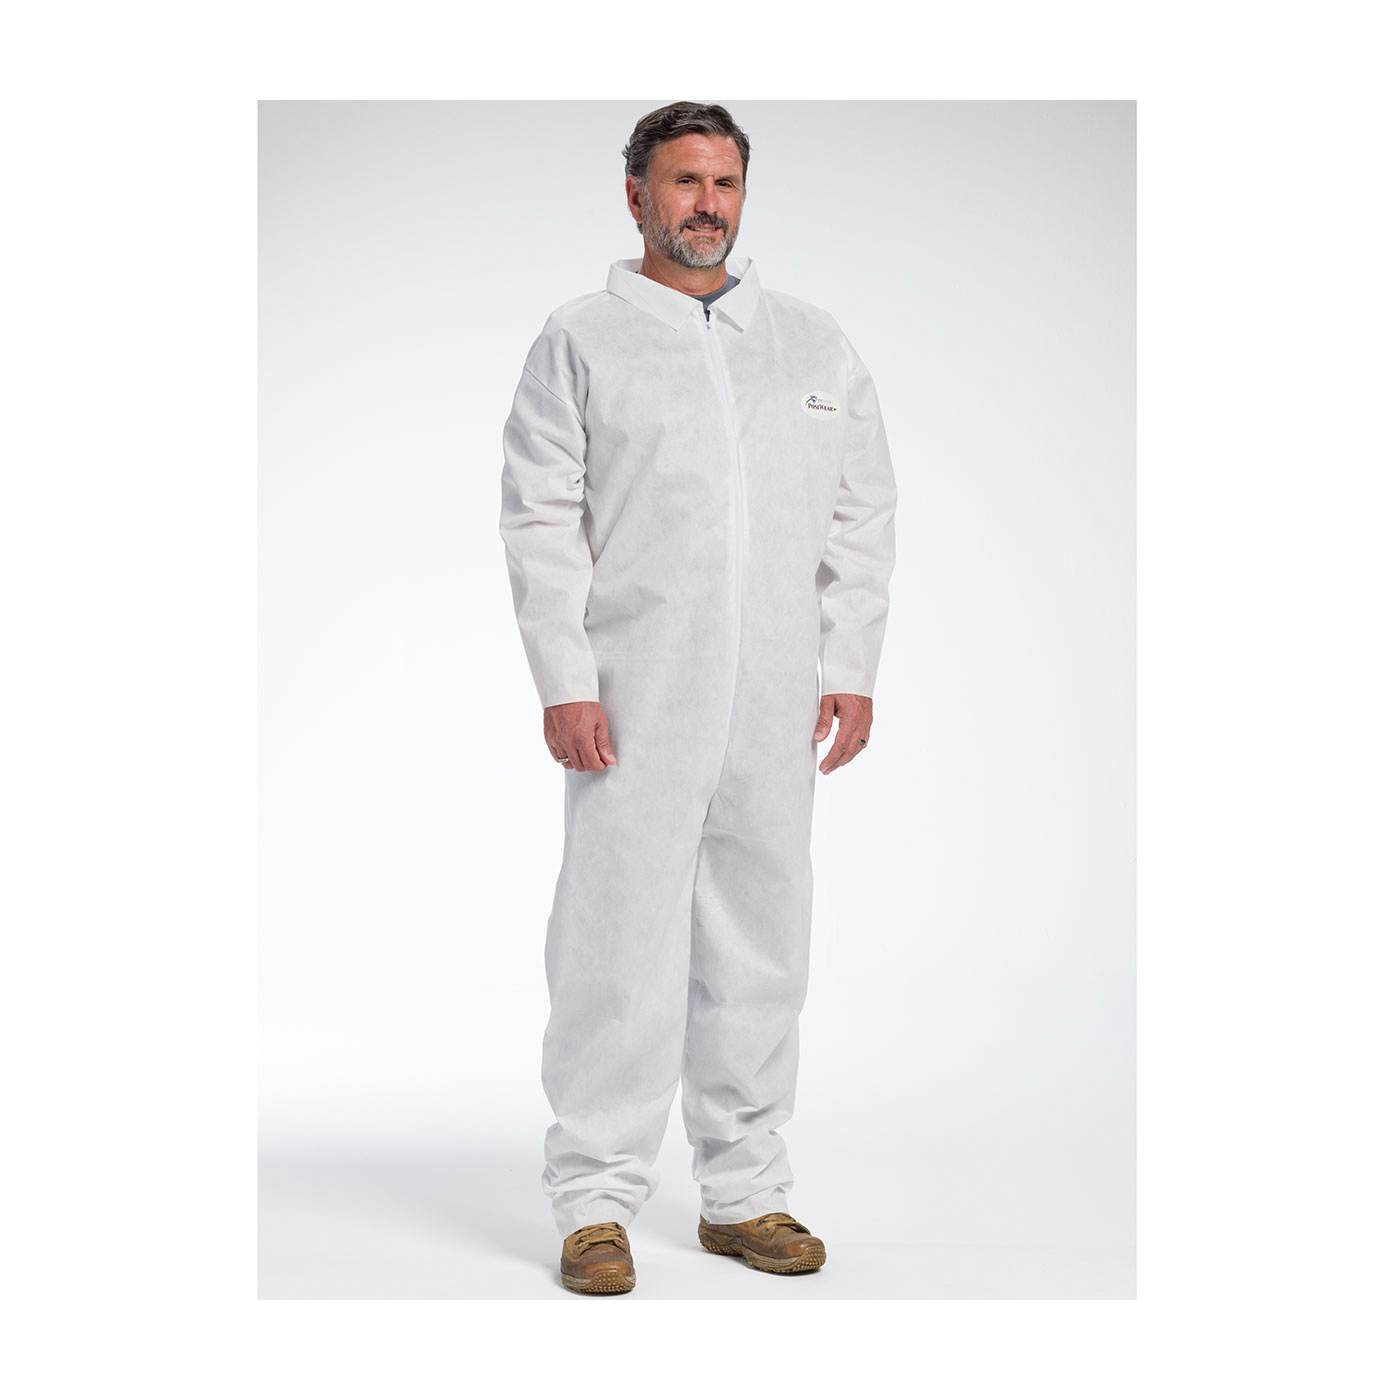 PIP® C3800/XL C3800 M3 Anti-Static Basic Disposable Coverall, XL, White, Polypropylene/SMMMS Fabric, 27.6 in Chest, 29-1/2 in L Inseam